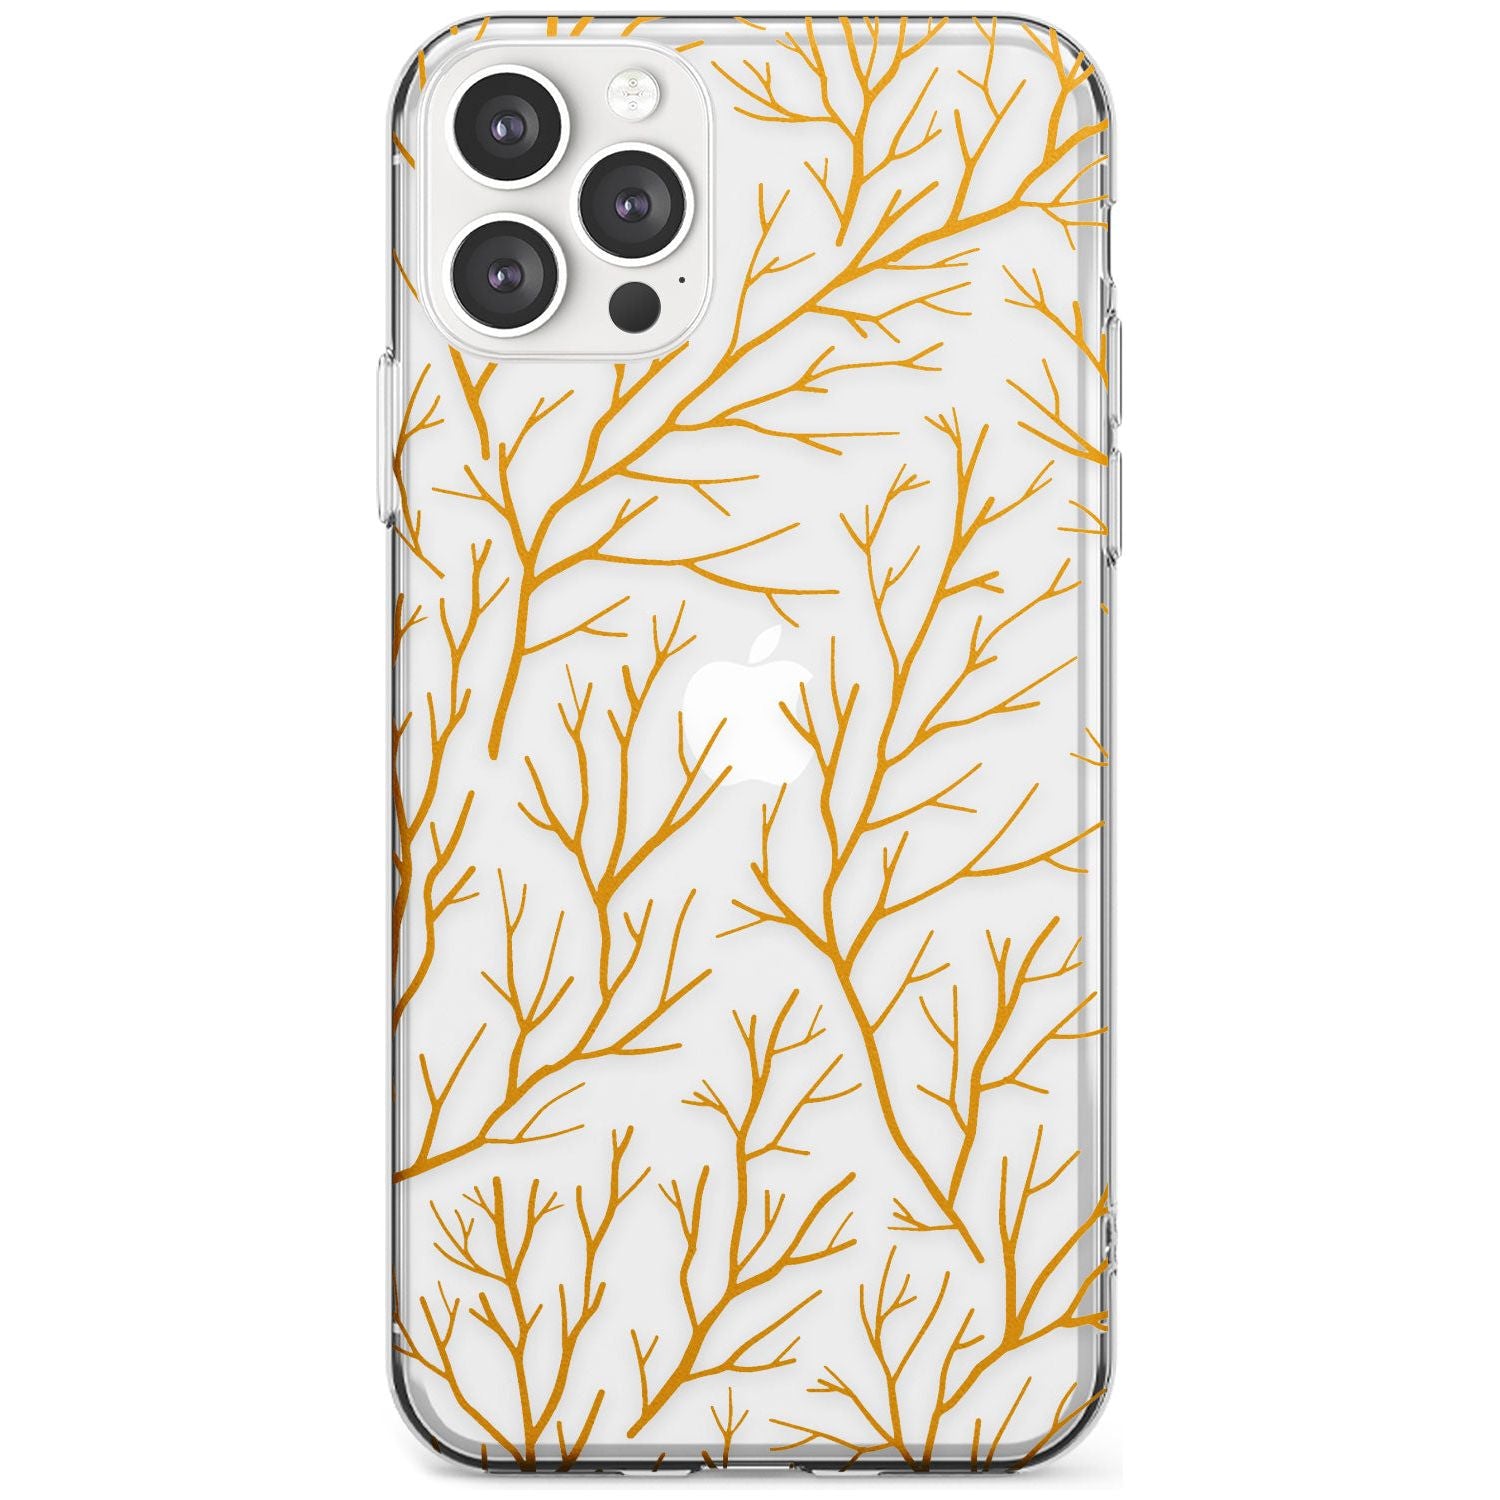 Personalised Bramble Branches Pattern Slim TPU Phone Case for iPhone 11 Pro Max